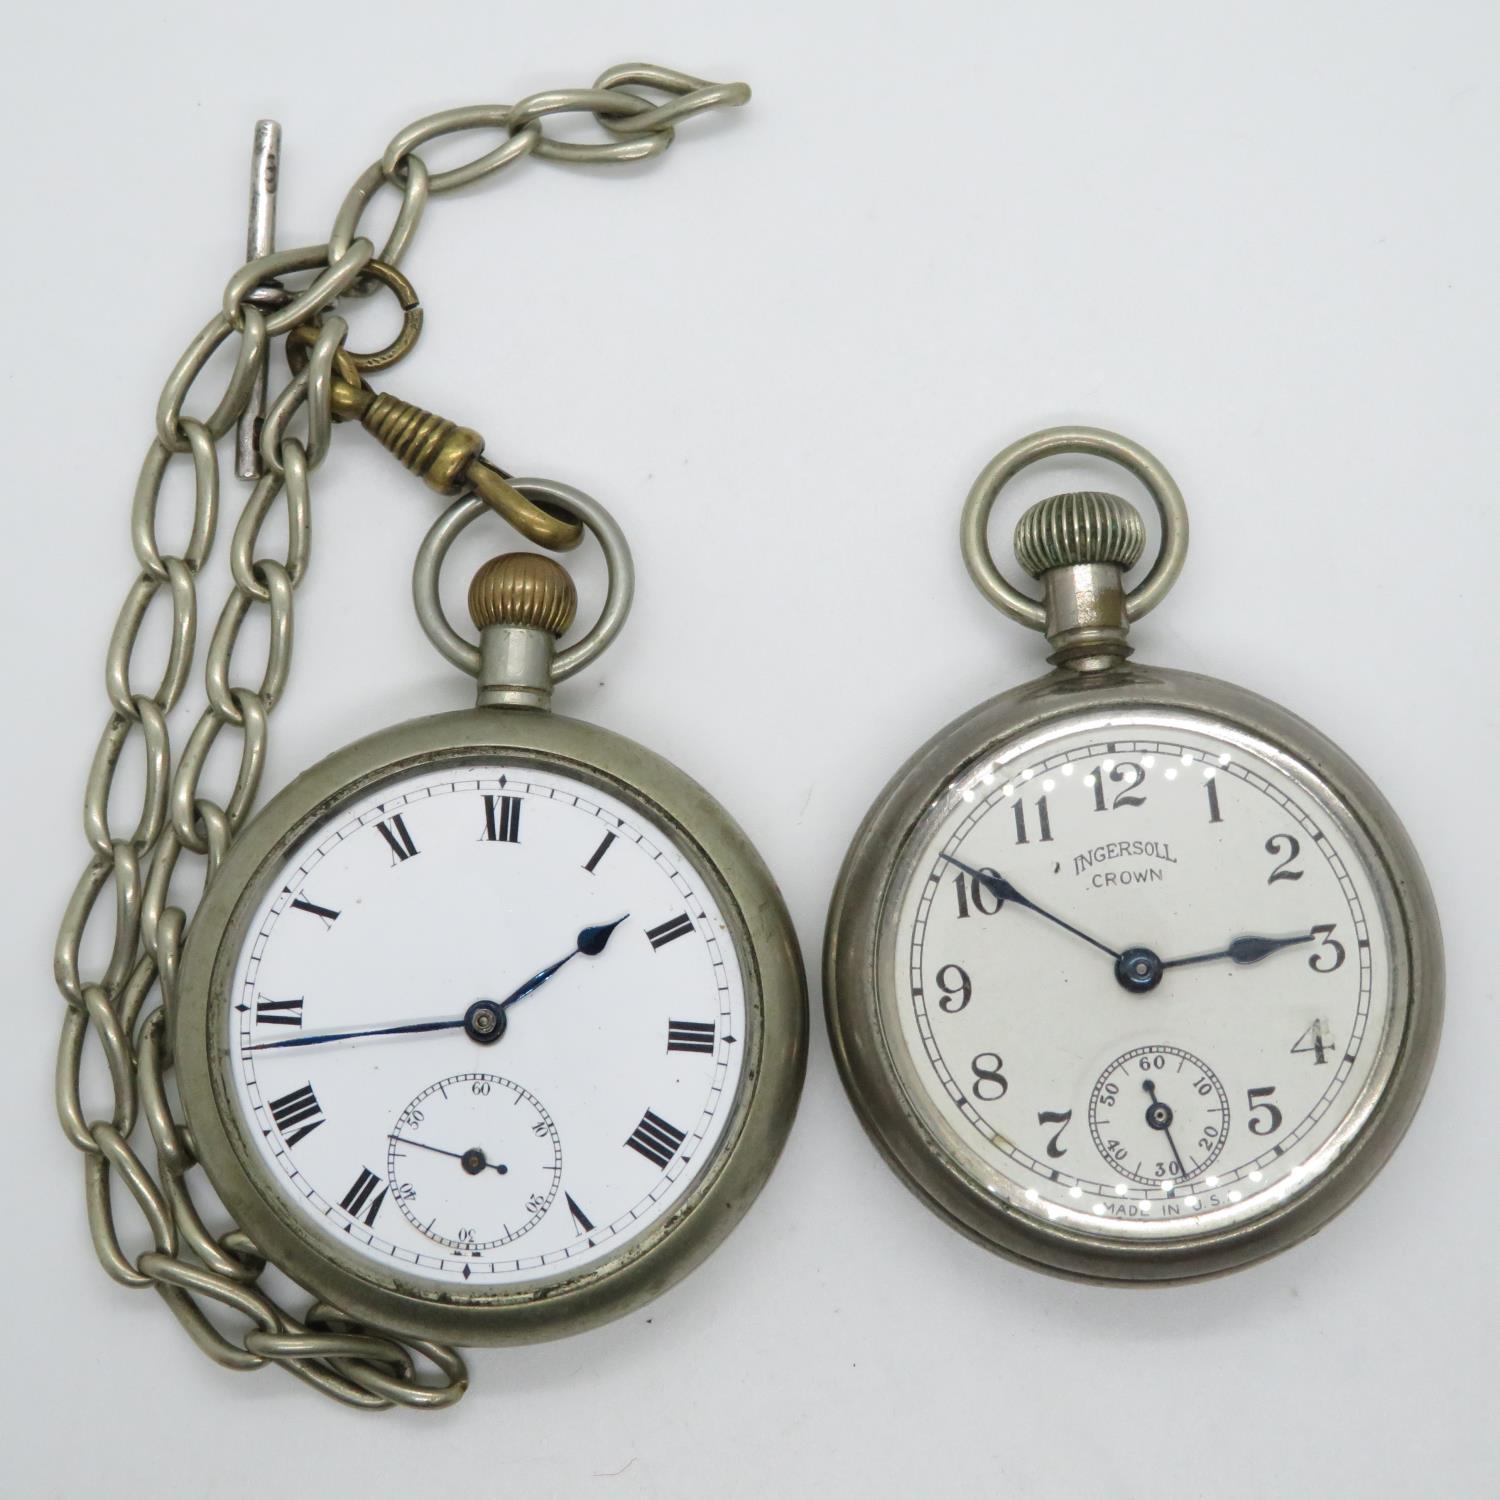 Pair of pocket watches - need attention